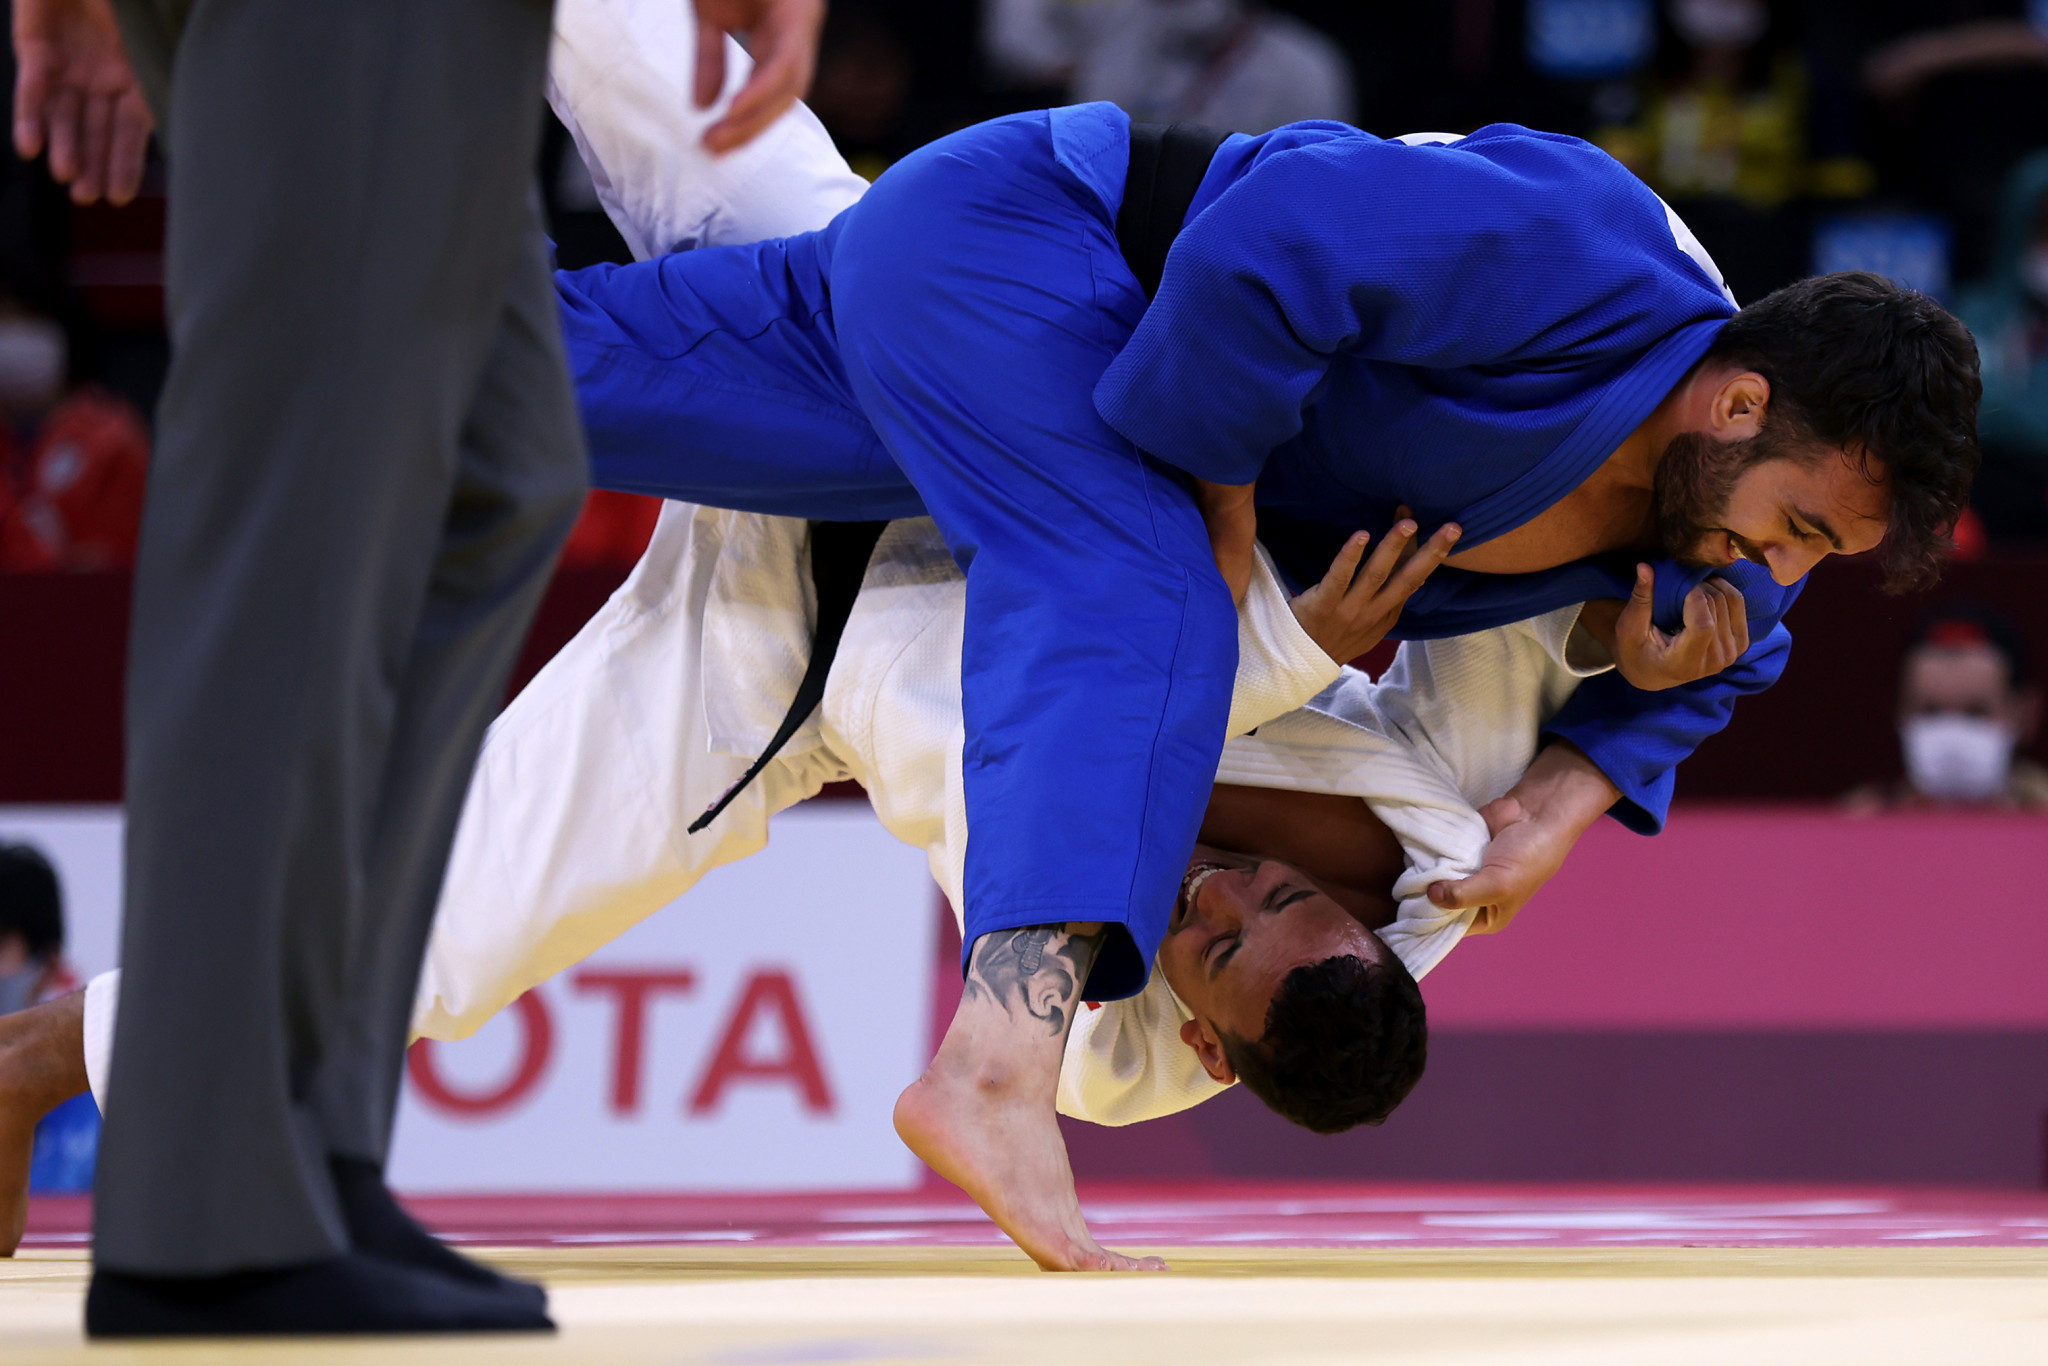 Home favourite Zhanbota Amanzhol, in white, will look to claim gold in the under-90kg category ©Getty Images